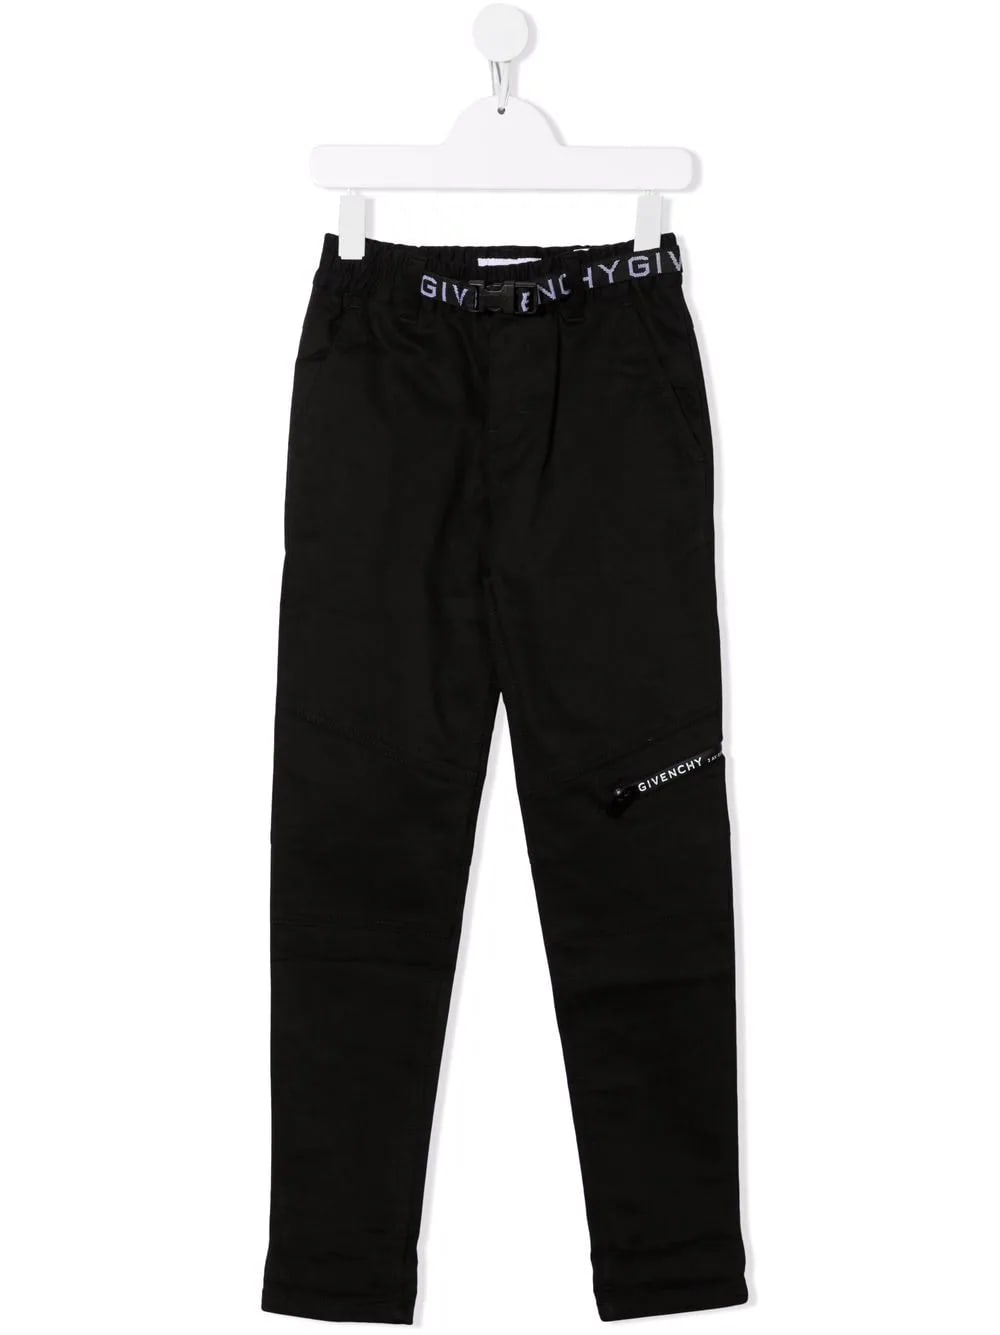 Kids Black Trousers With Logoed Belt And Givenchy Atelier Patch